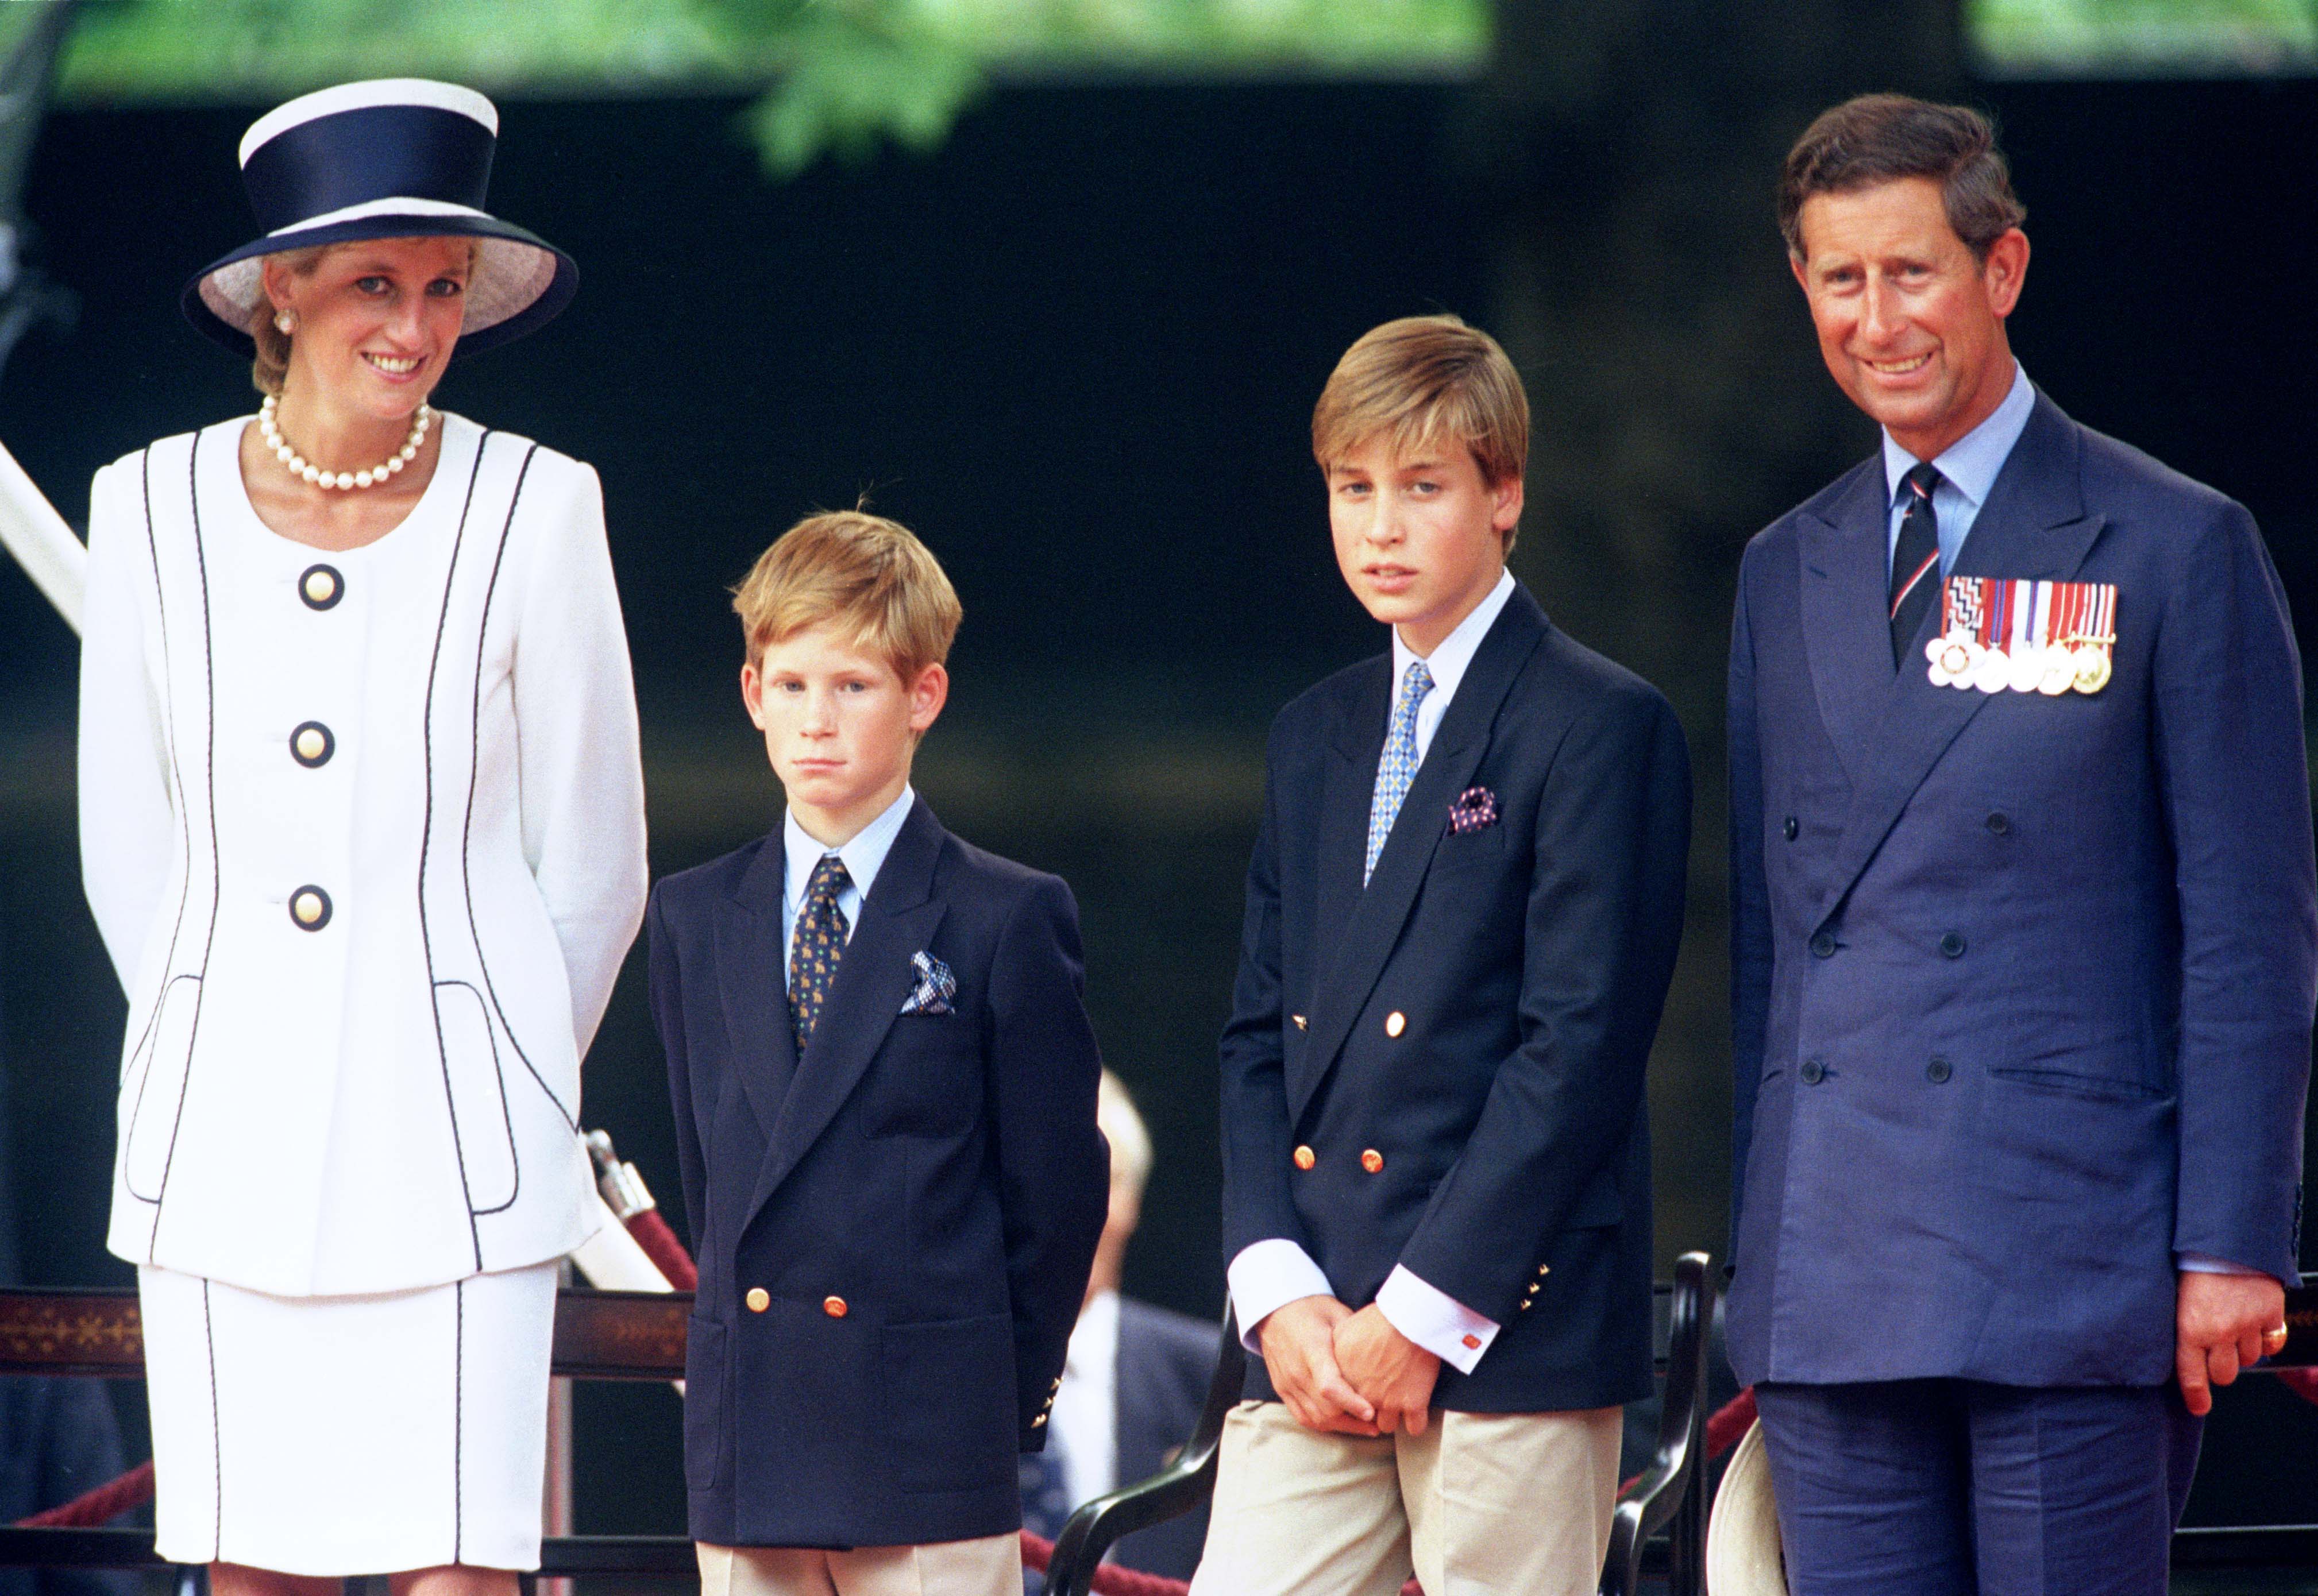 Prince Charles and Princess Diana, of Wales, Princes William and Prince Harry at The Vj Day 50Th Anniversary Celebrations, London. | Source: Getty Images